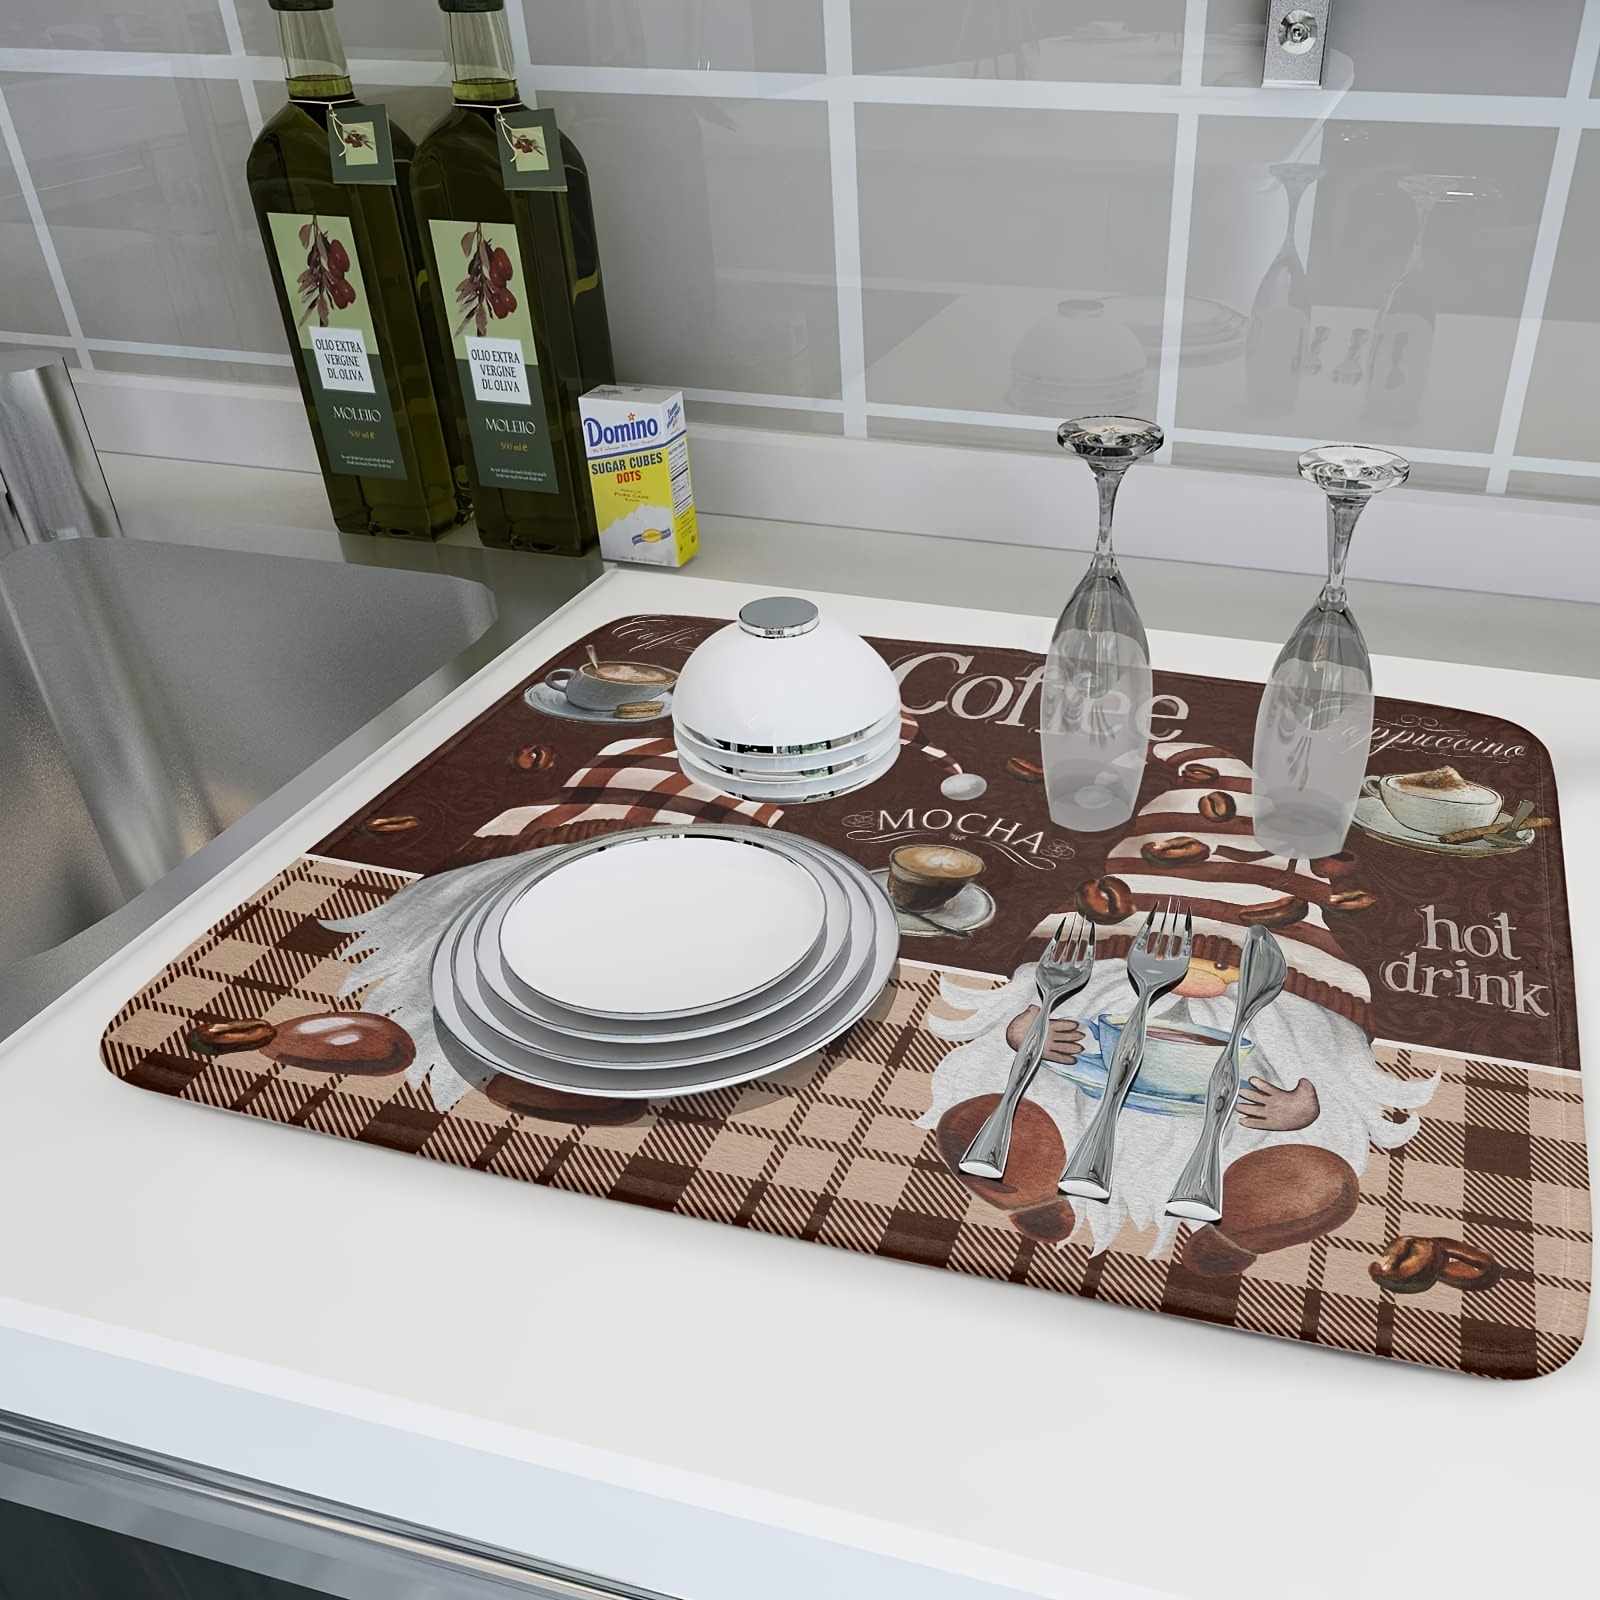 Coffee Dish Drying Mat, Coffee Maker Mats, For Tabletop Table